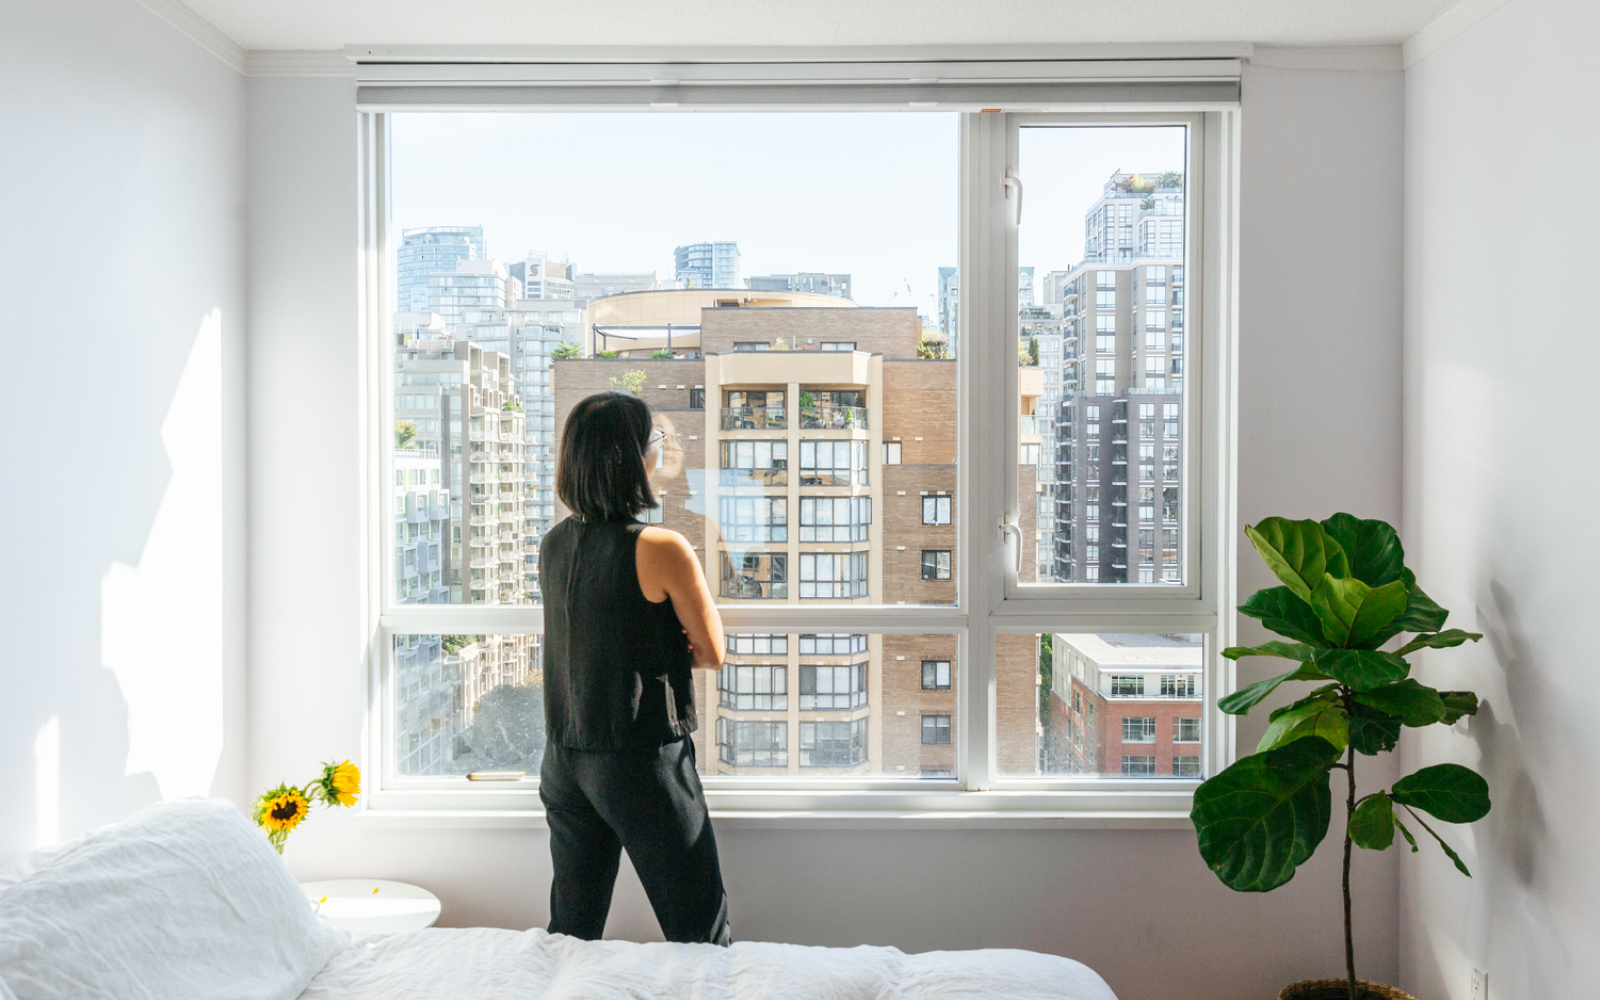 Image - Apartment tour photo of renter looking out the window in a bedroom